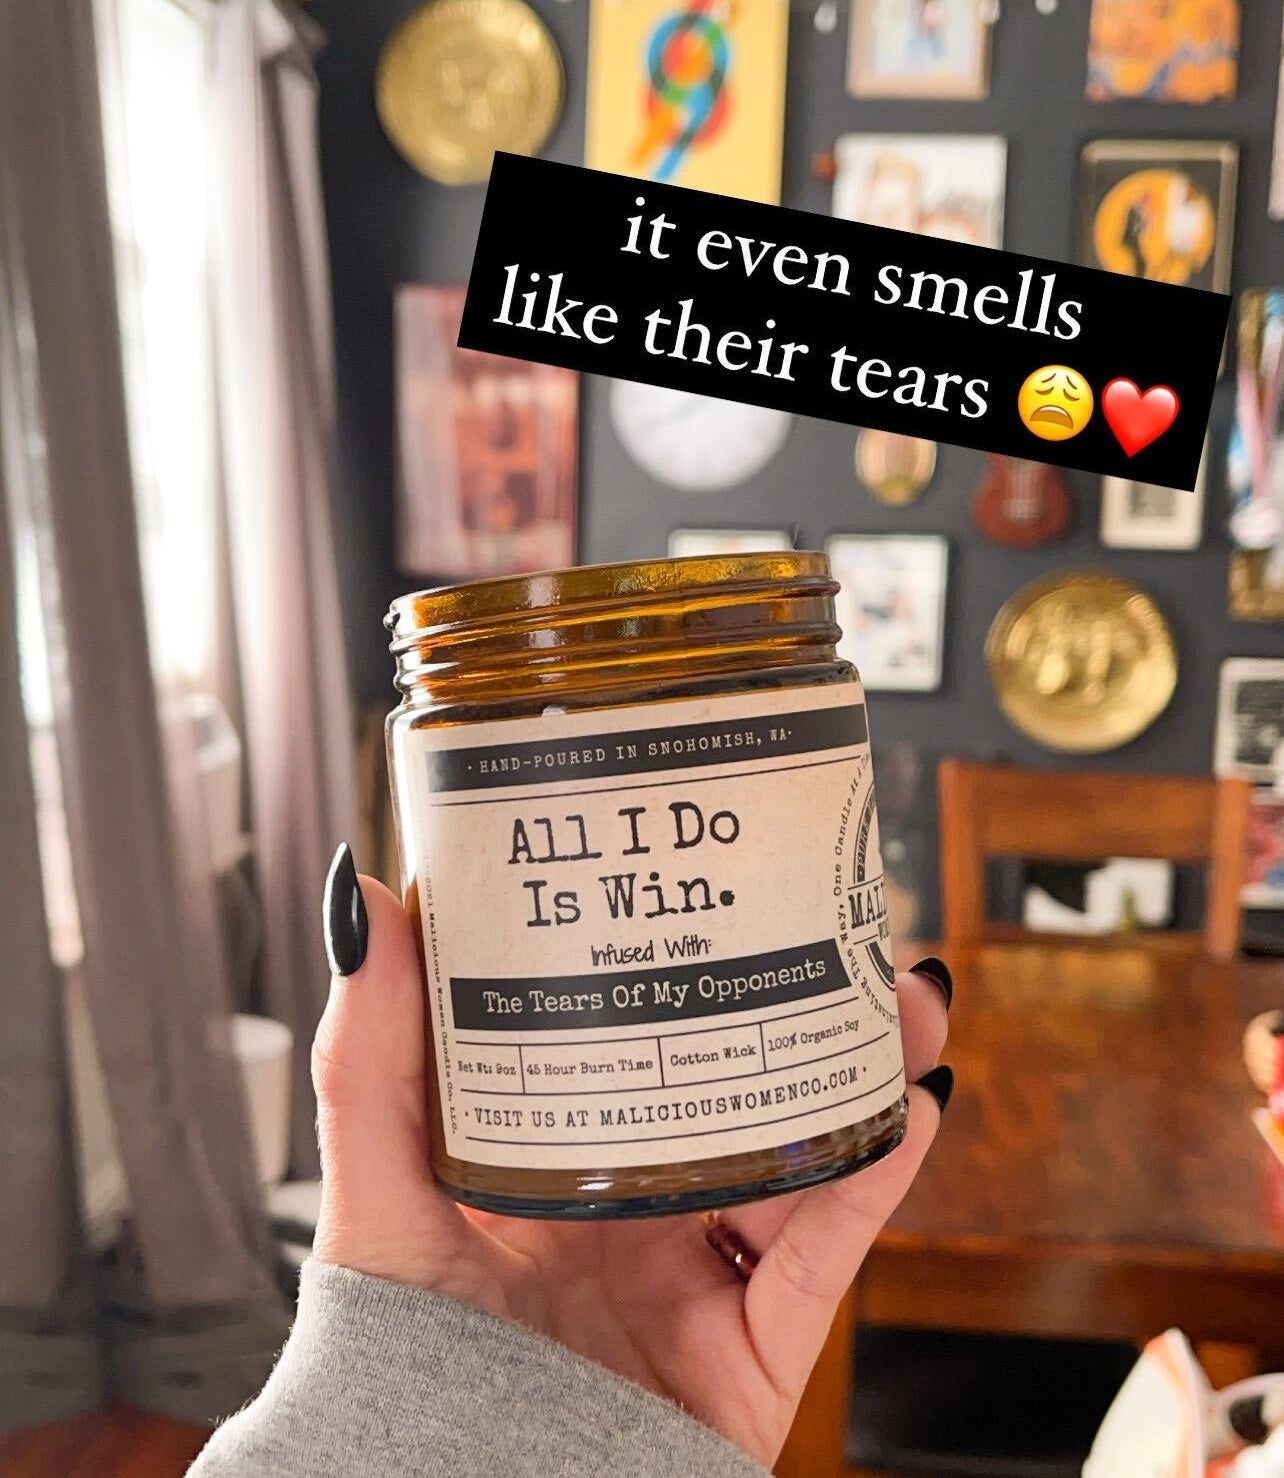 A person holding up a candle that says &quot;All I do is win, infused with the tears of my opponents&quot; and the words &quot;it even smells like their tears&quot; written on the image